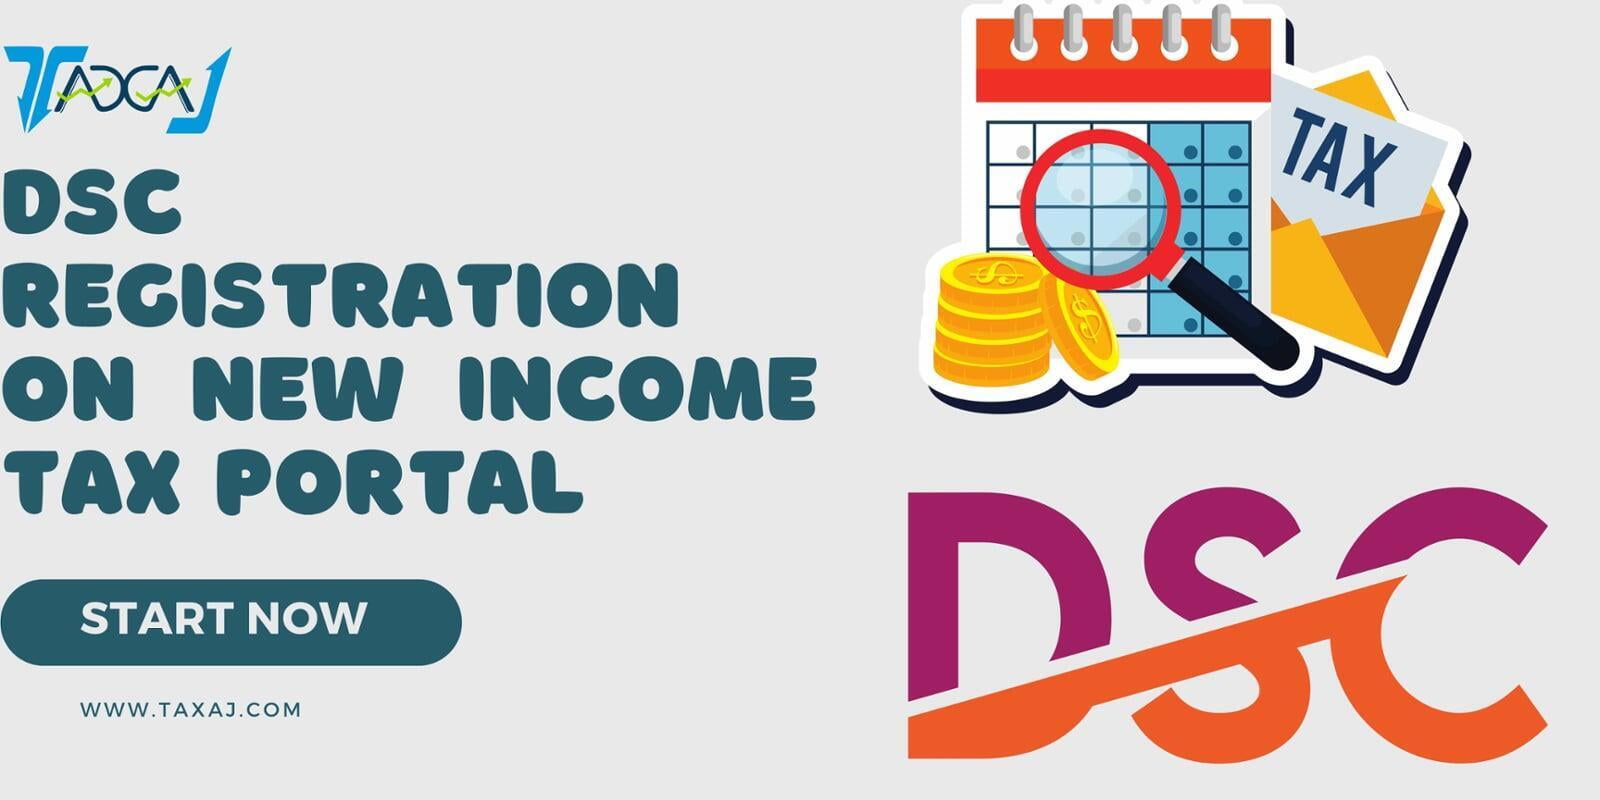 How to register DSC on new income tax portal